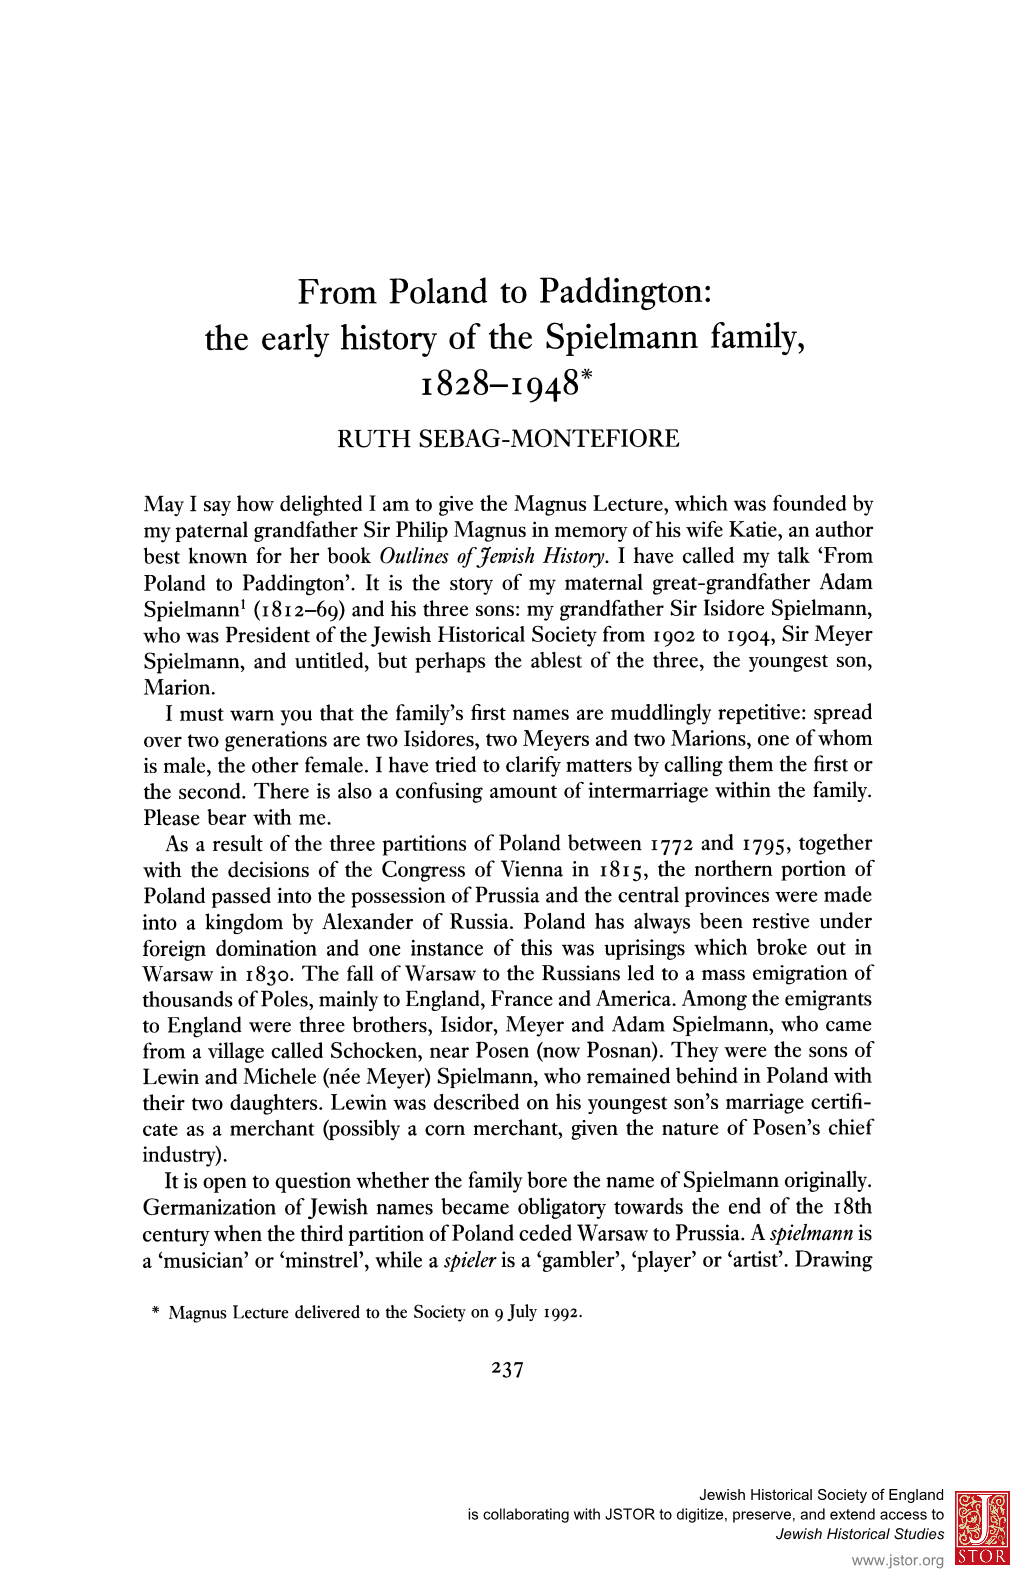 The Early History of the Spielmann Family, 1828—1948